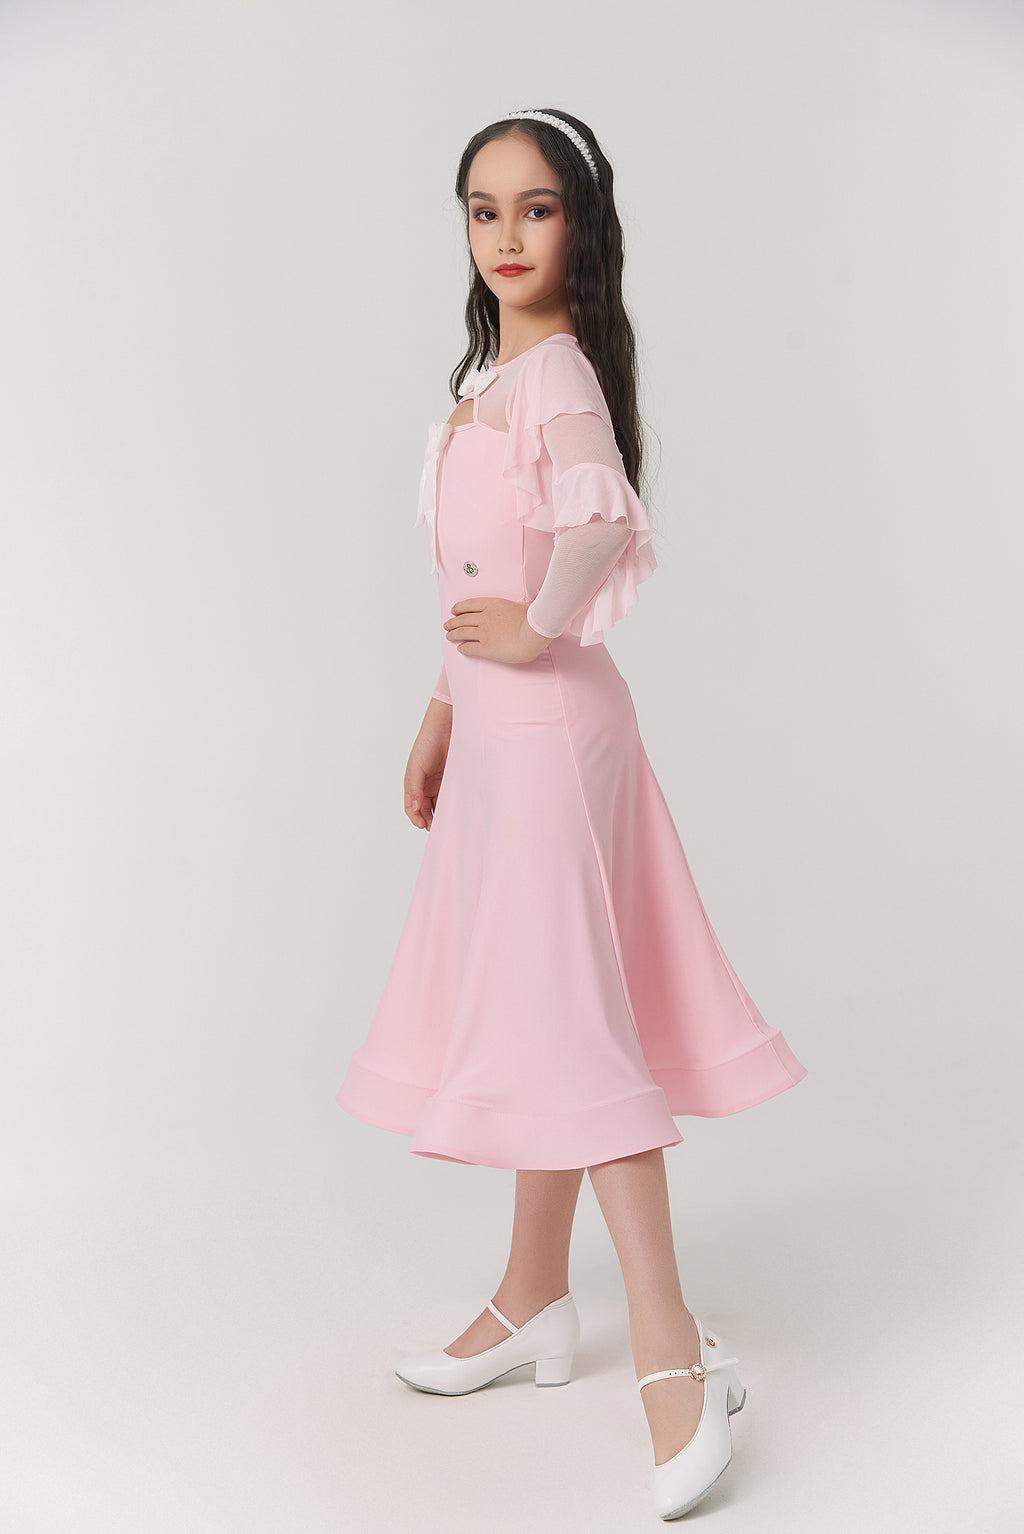 DQ-2316 Kid High-End Customized Cew Neck Cut Out Dress